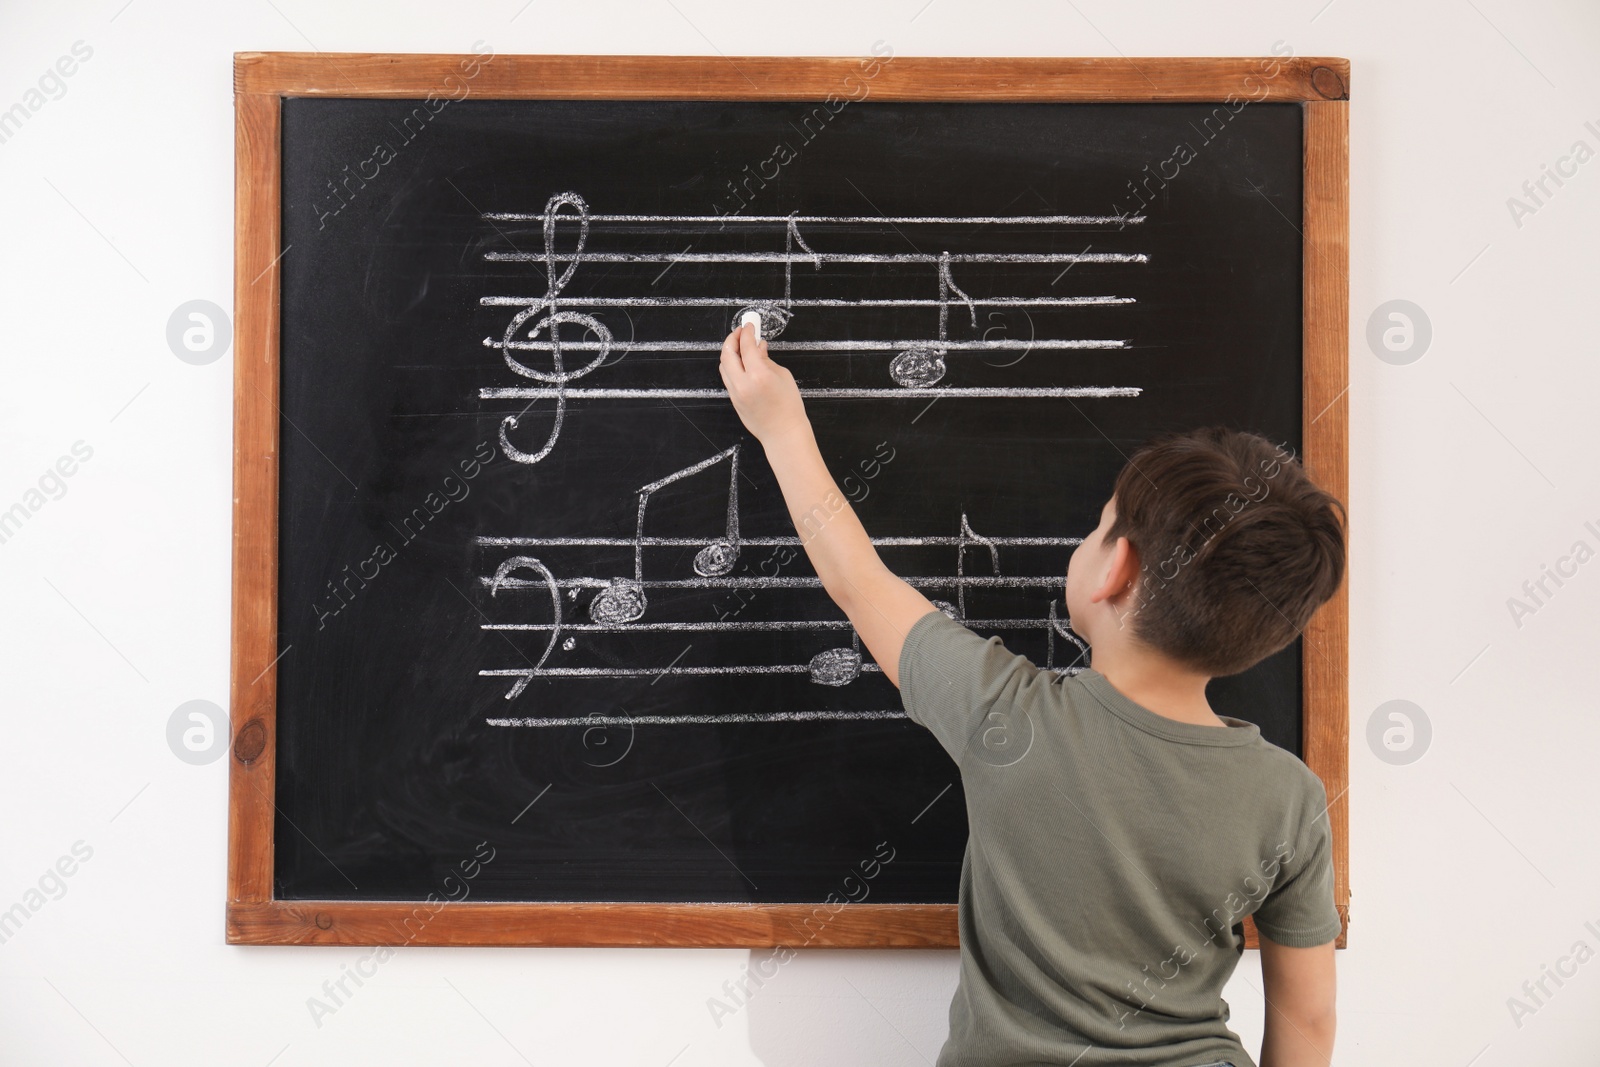 Photo of Little boy writing music notes on blackboard in classroom